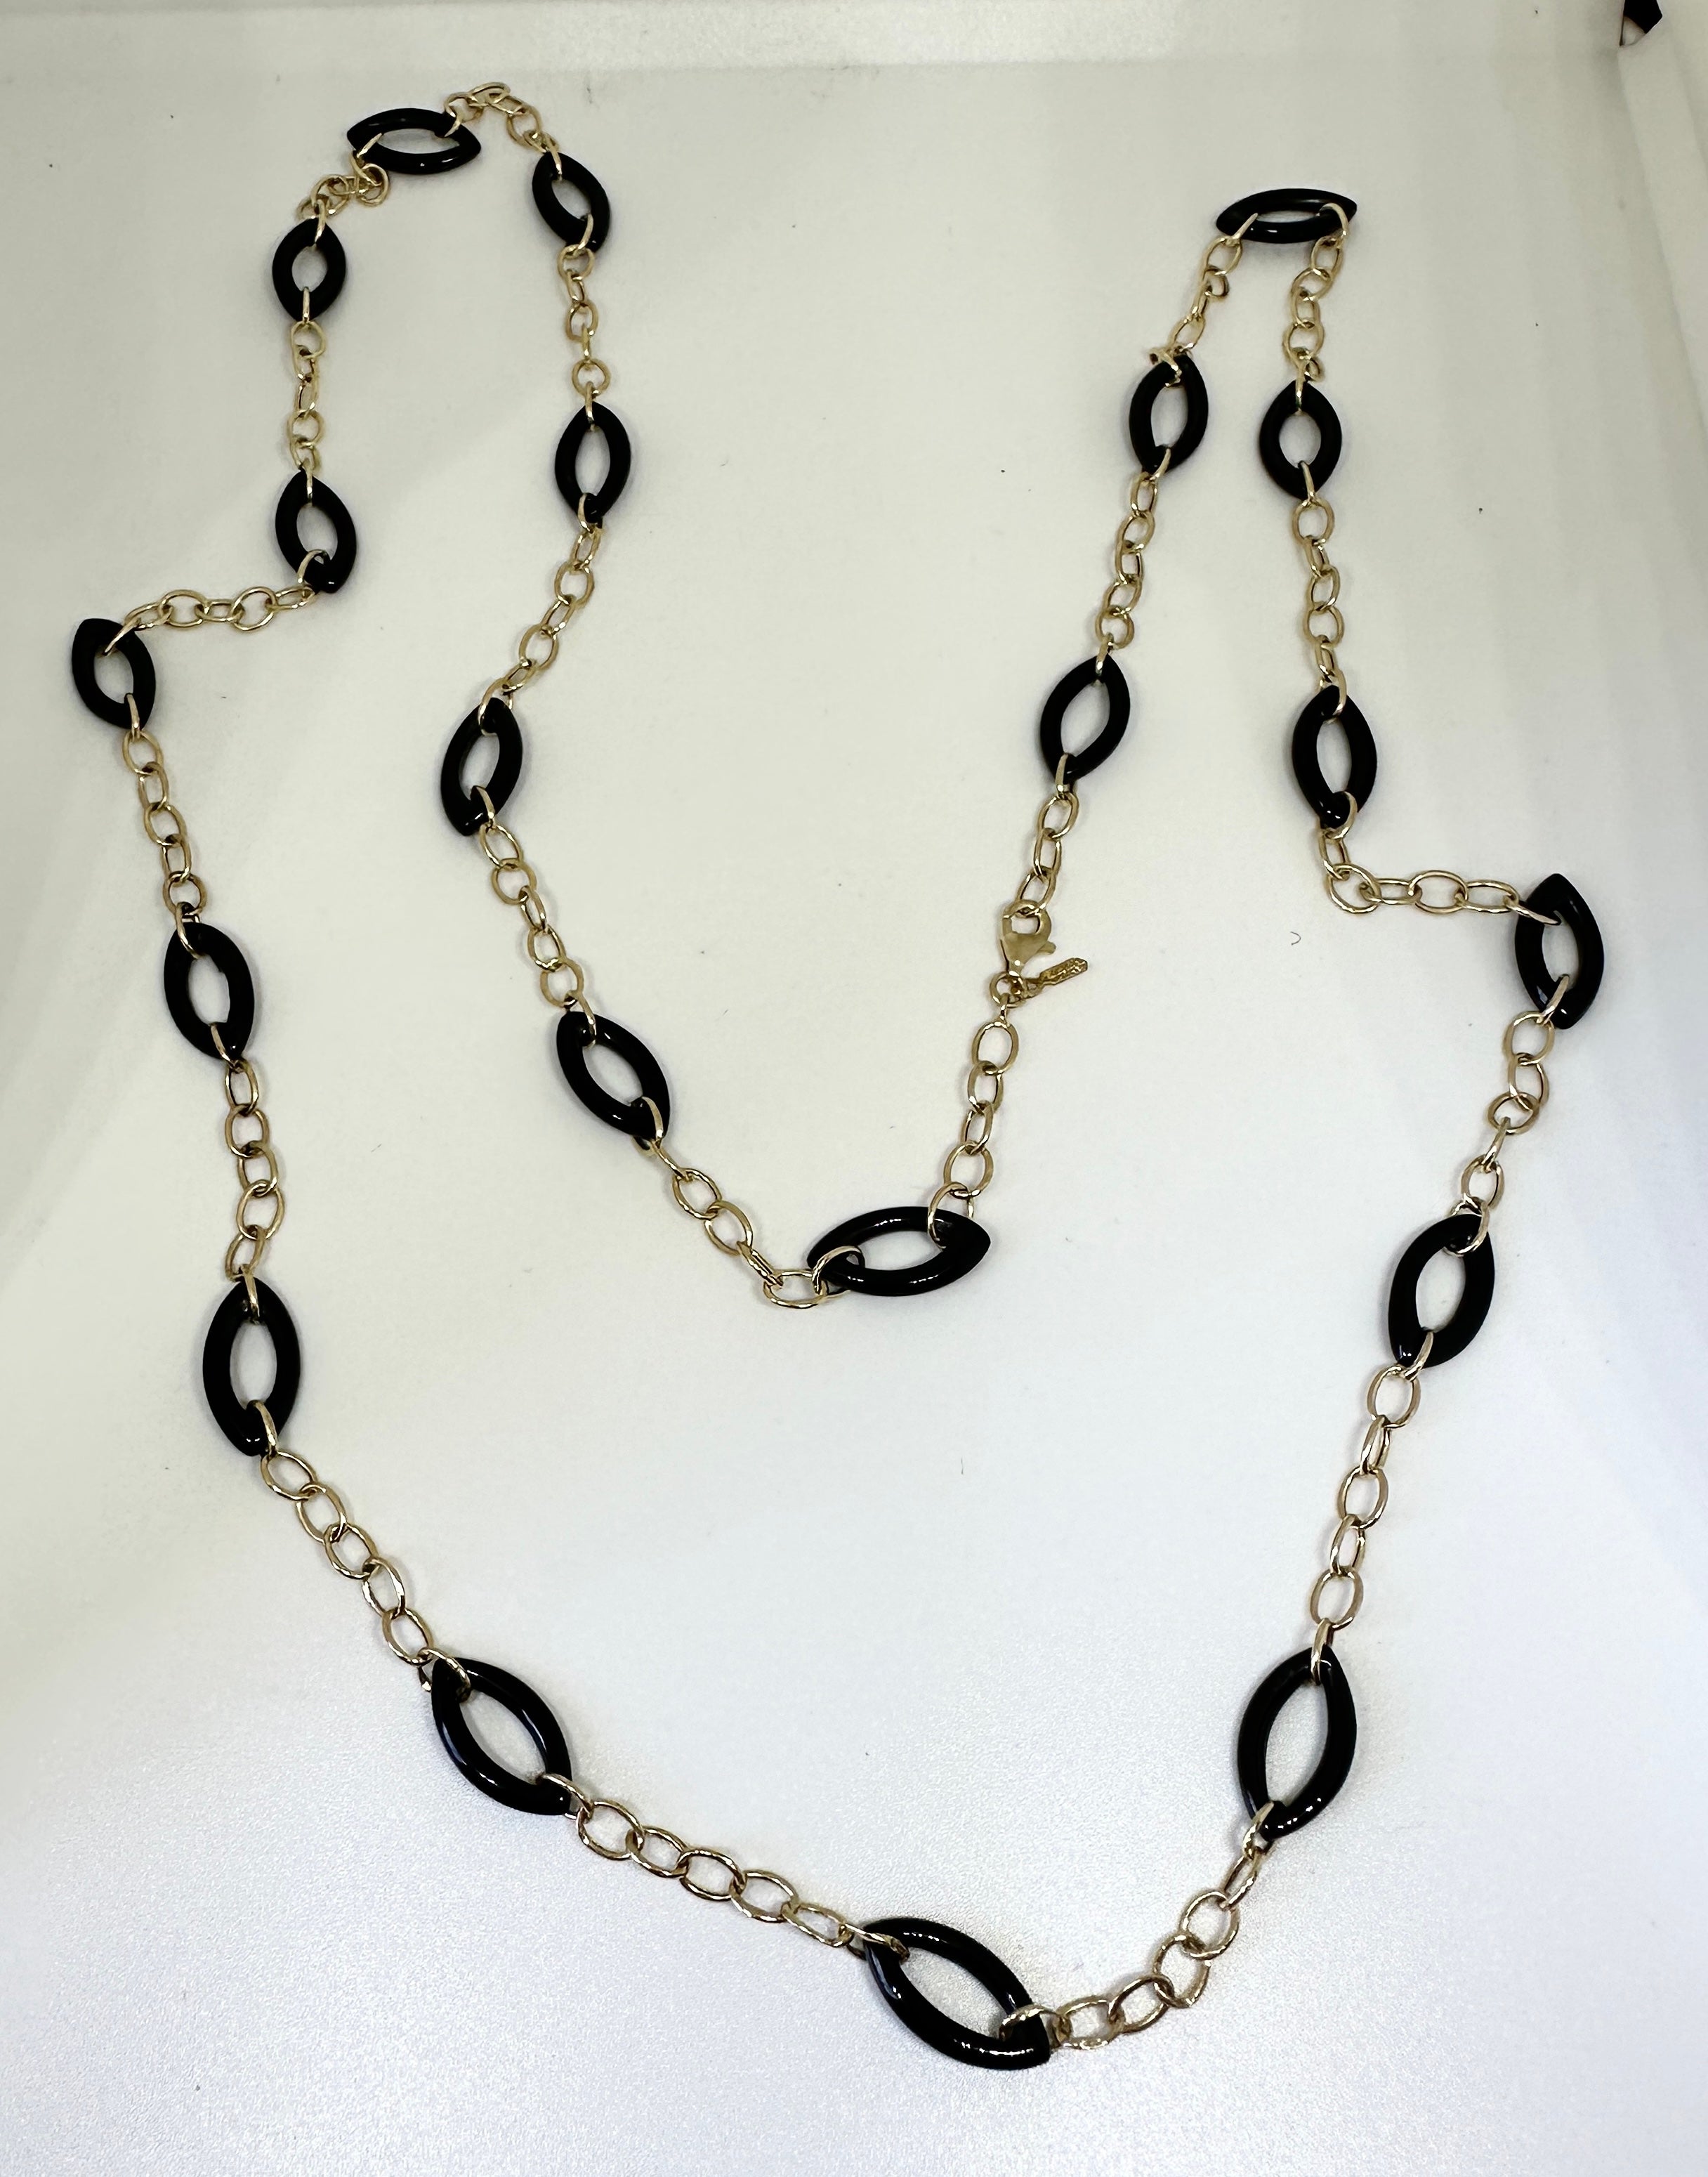 Women's Black Coral 14 Karat Gold Necklace 36 Inches Chain Link Necklace For Sale